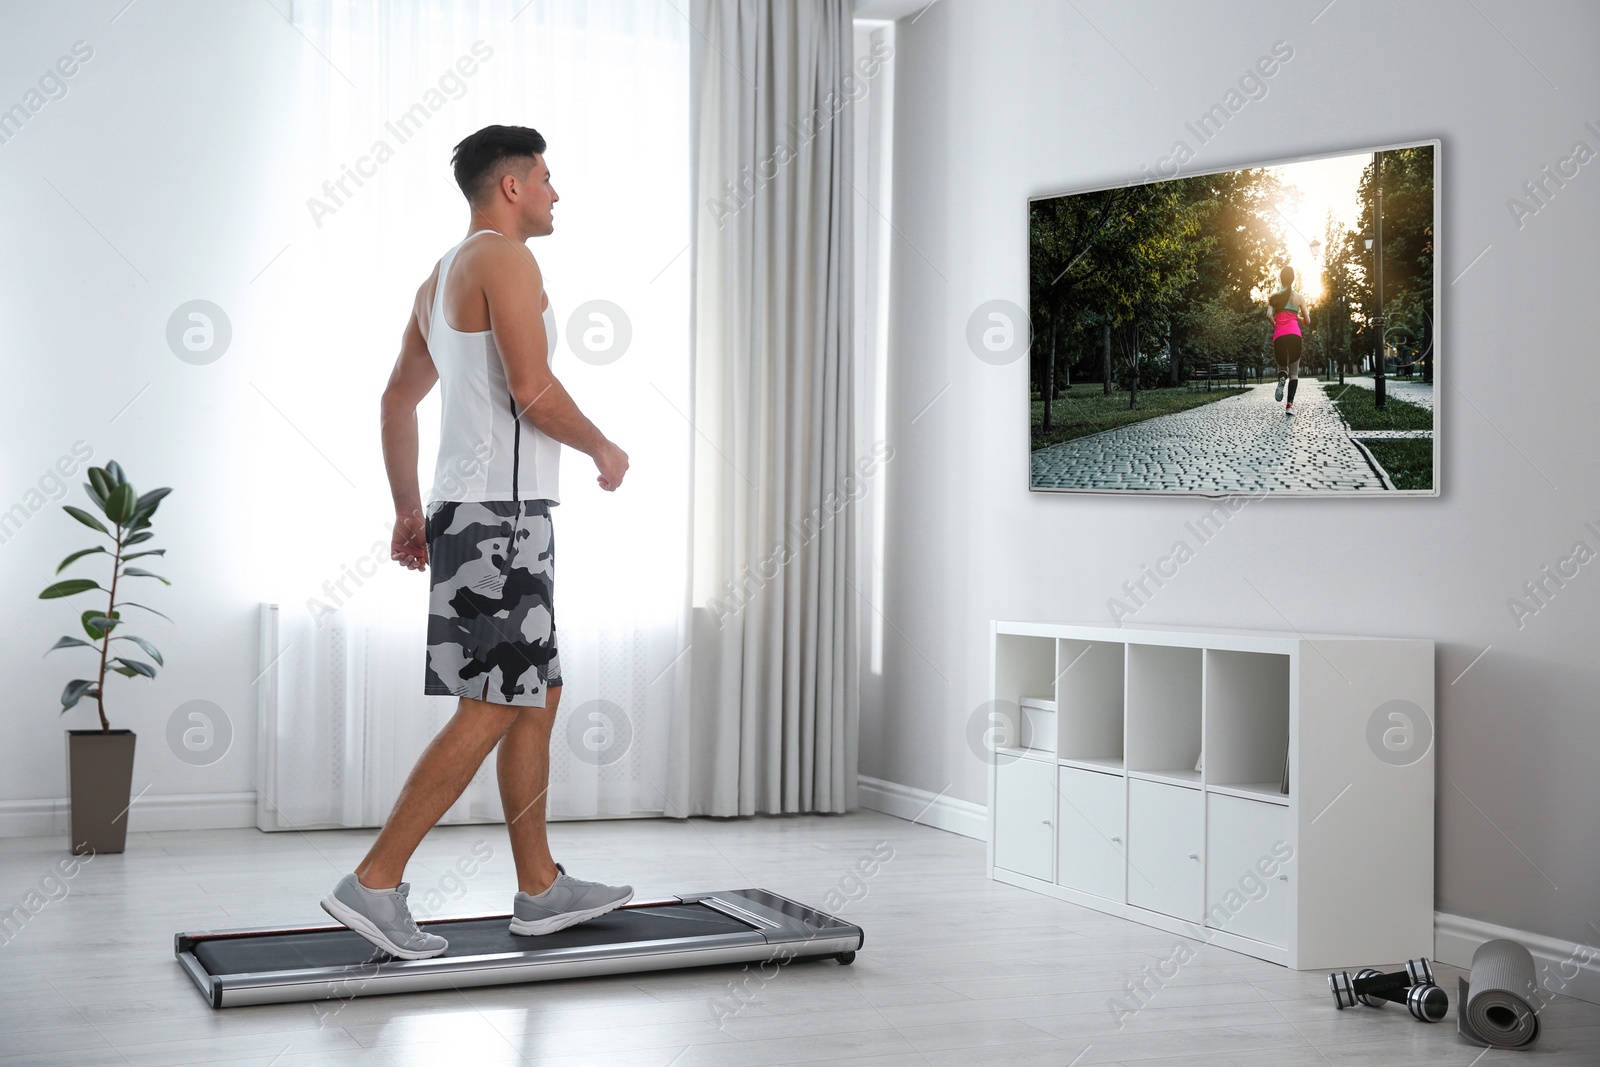 Image of Sporty man training on walking treadmill and watching TV at home